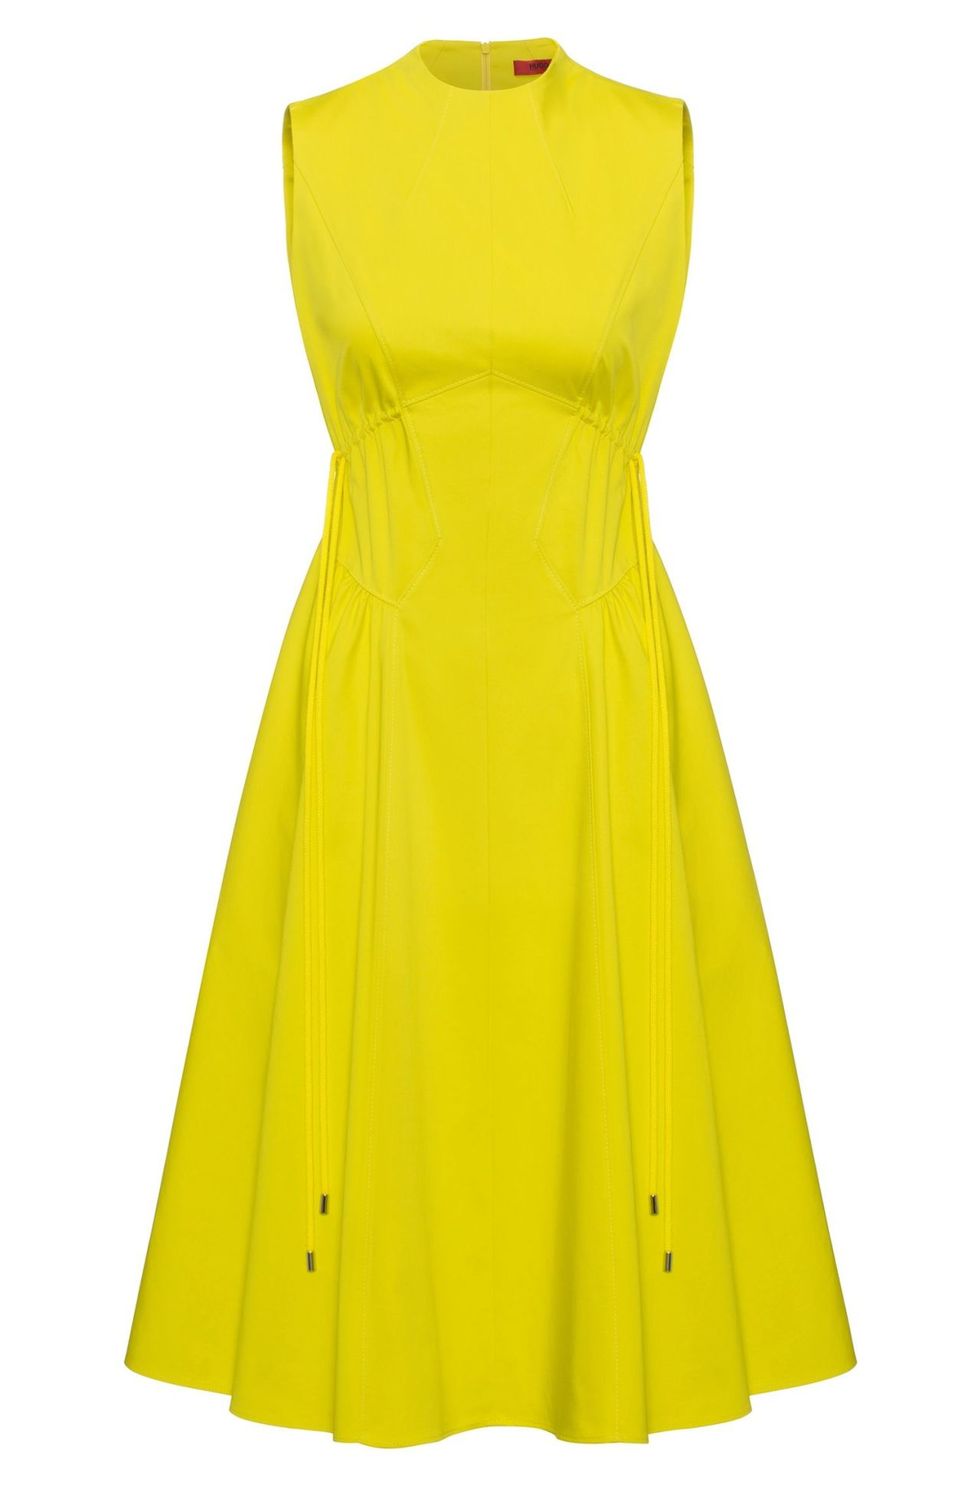 Clothing, Dress, Day dress, Yellow, Cocktail dress, A-line, Sleeve, Neck, One-piece garment, Formal wear, 